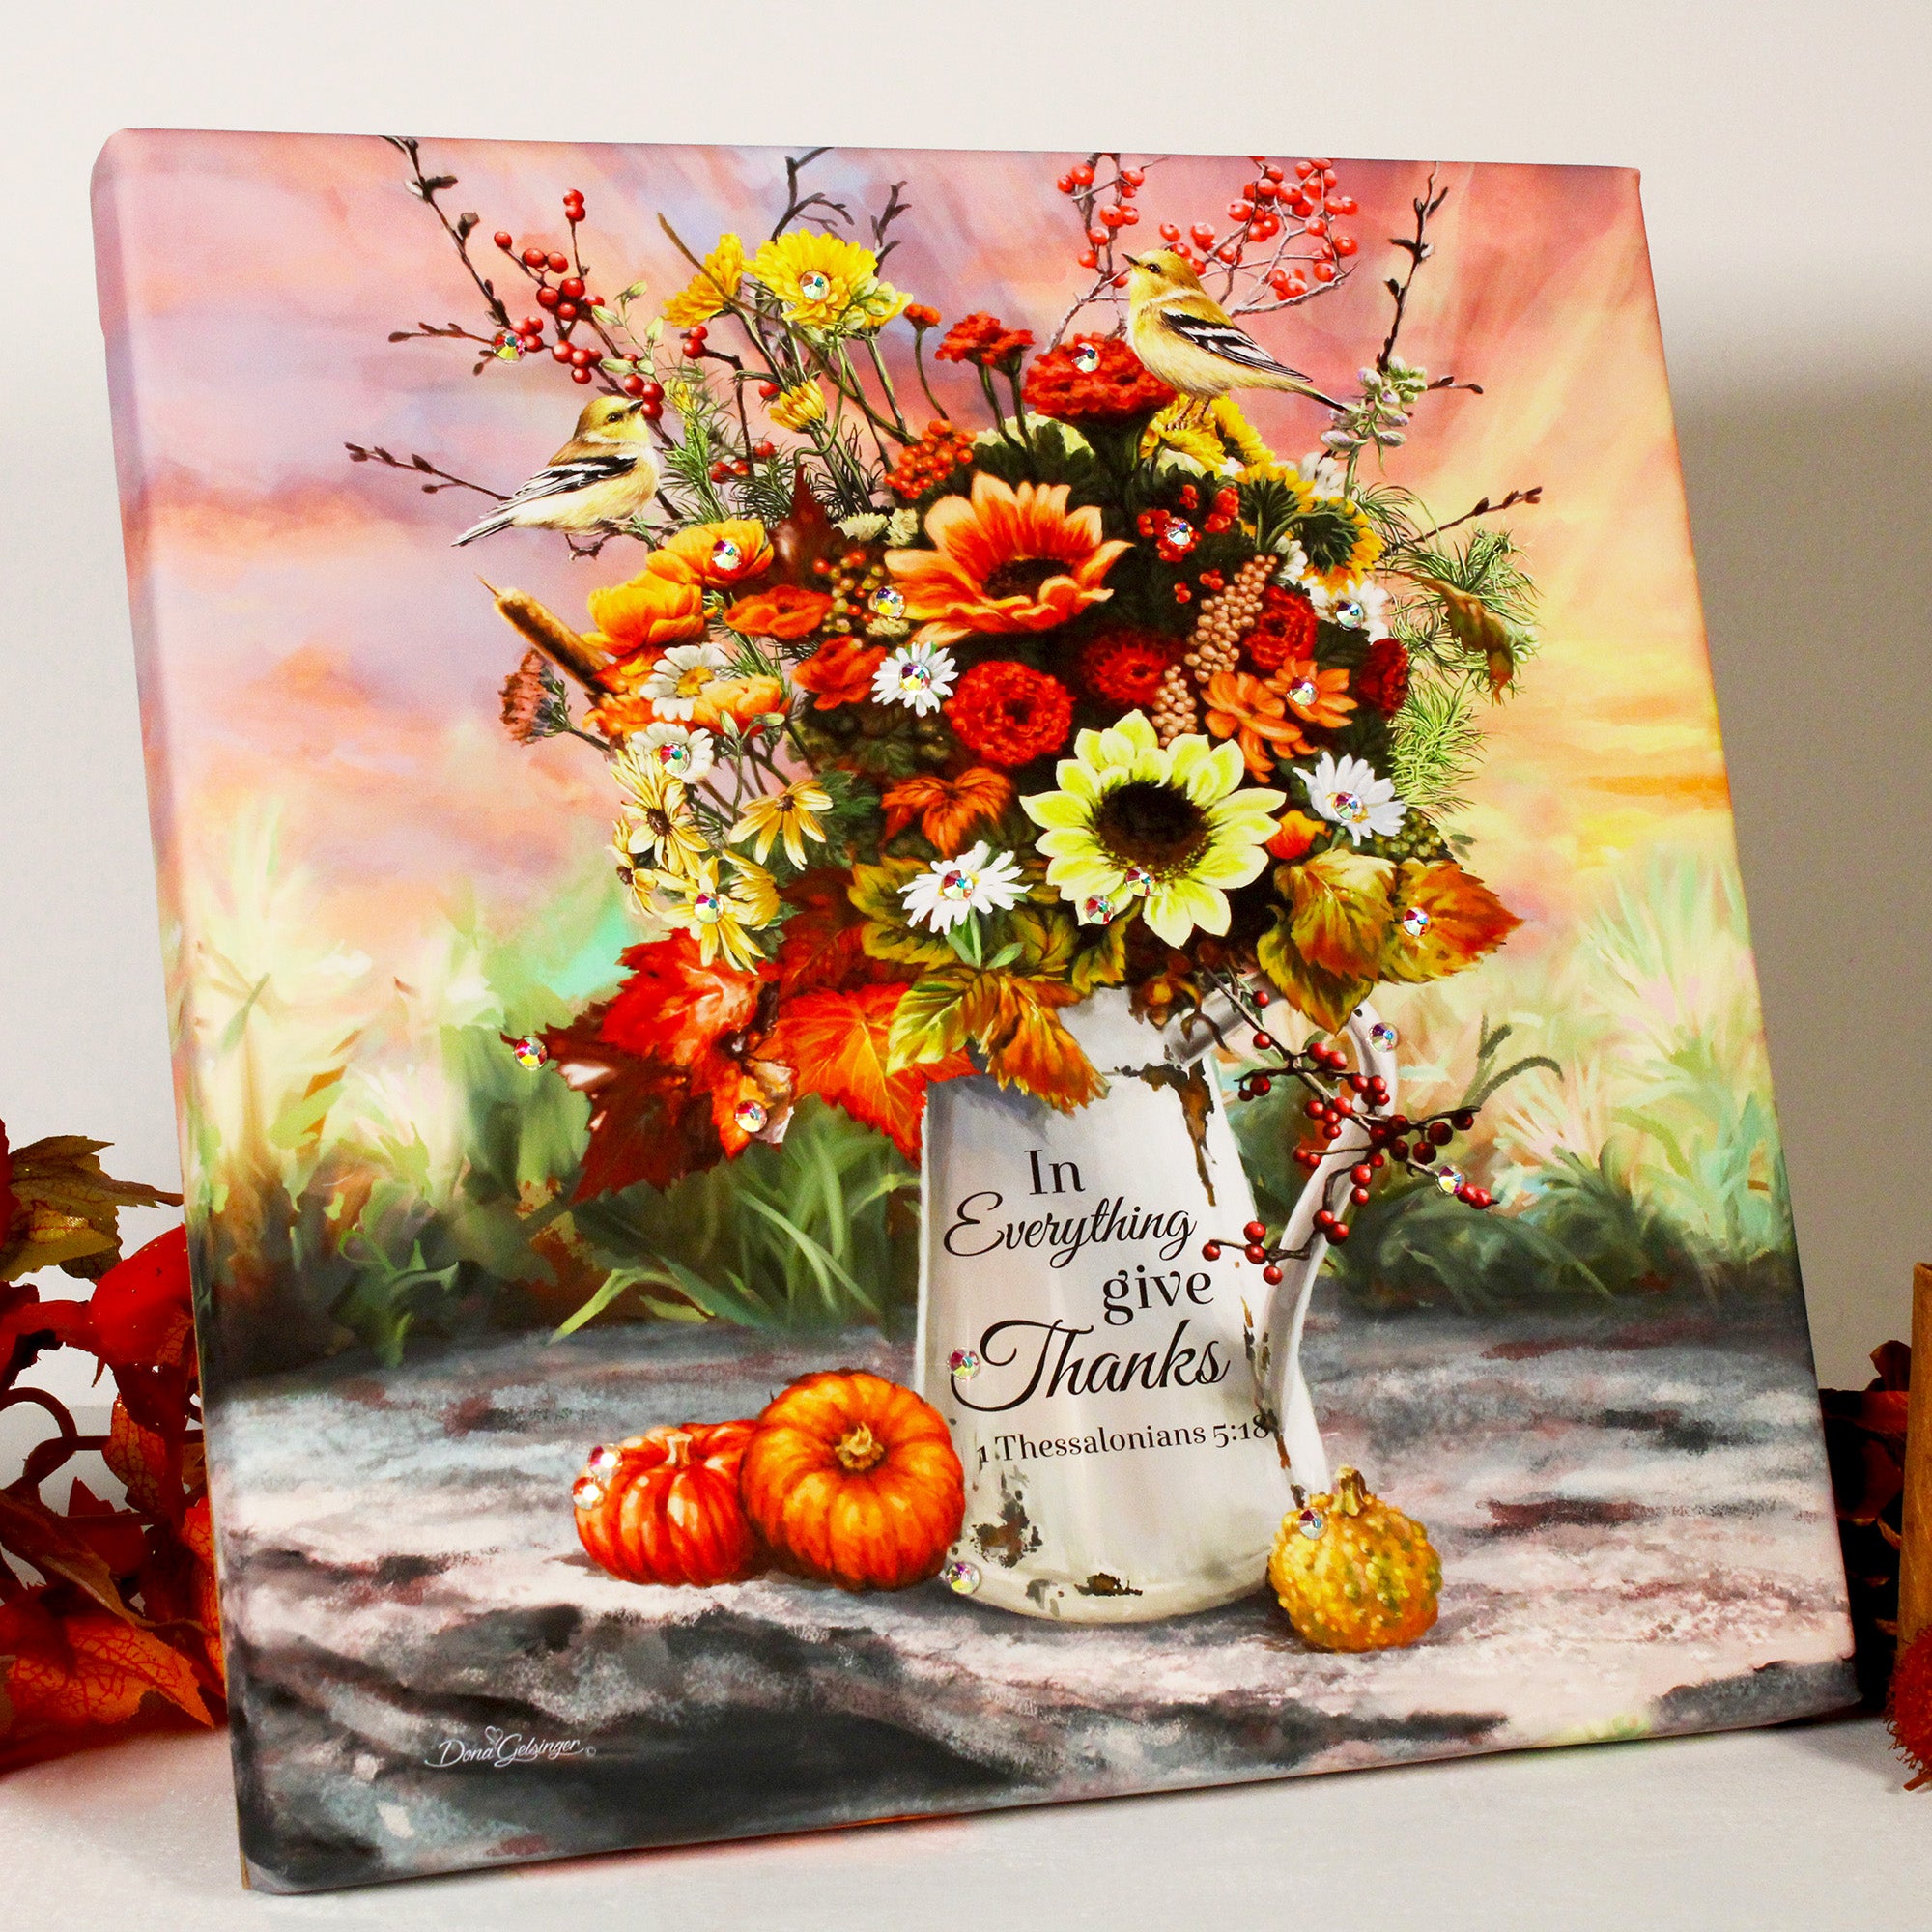 This exquisite piece features an old tin watering can adorned with a stunning fall-themed bouquet, complete with vibrant hues and dazzling crystals that catch the light and make the colors pop.